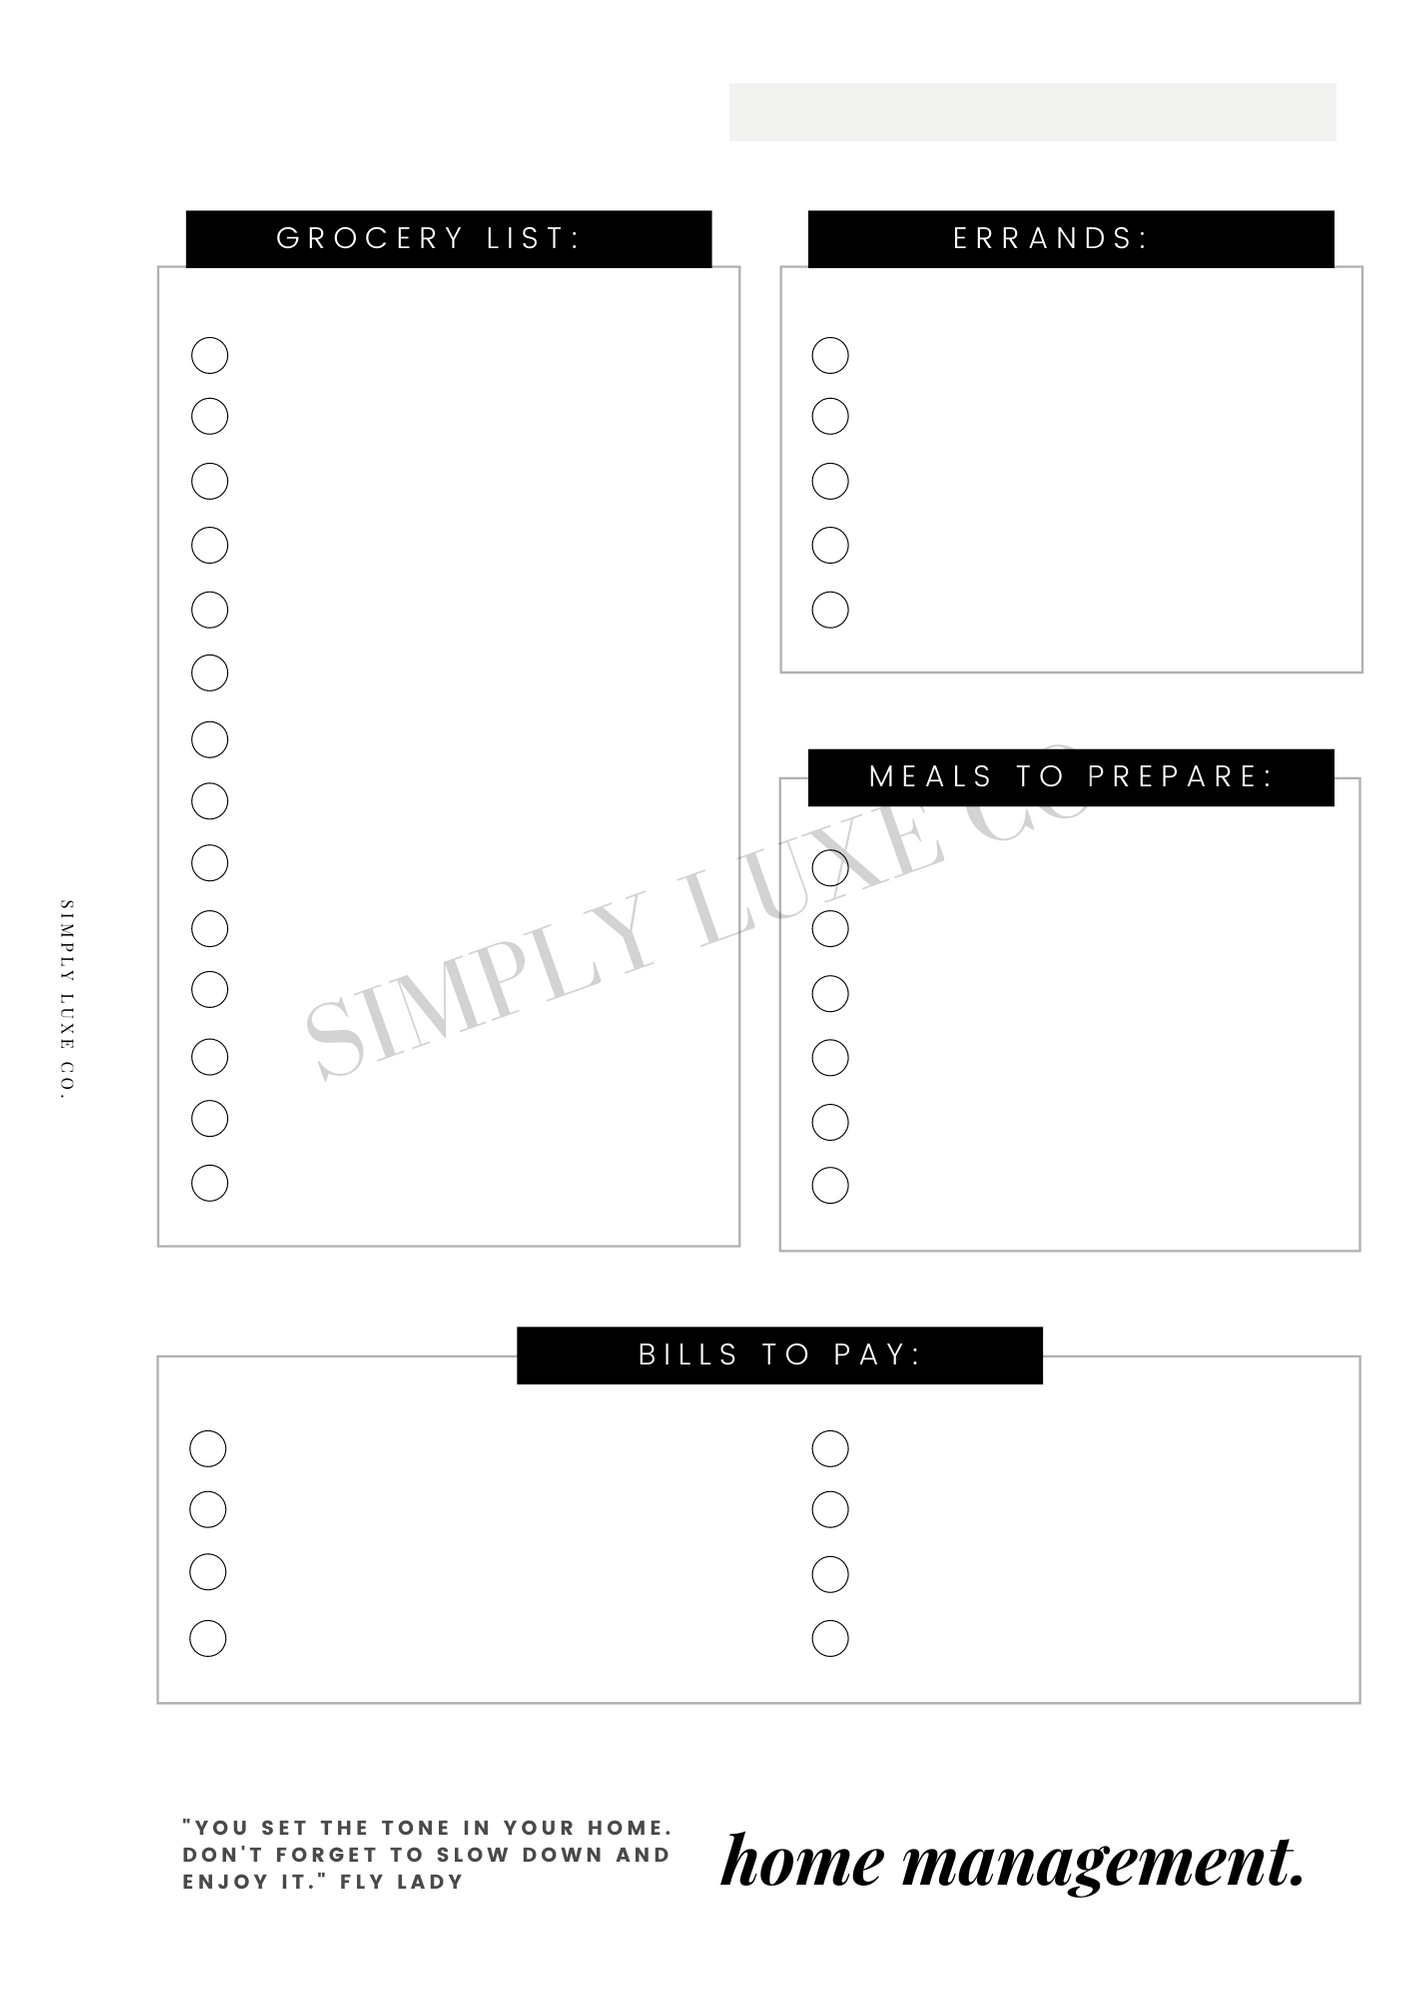 home management "Editorial Edition" Printable Insert